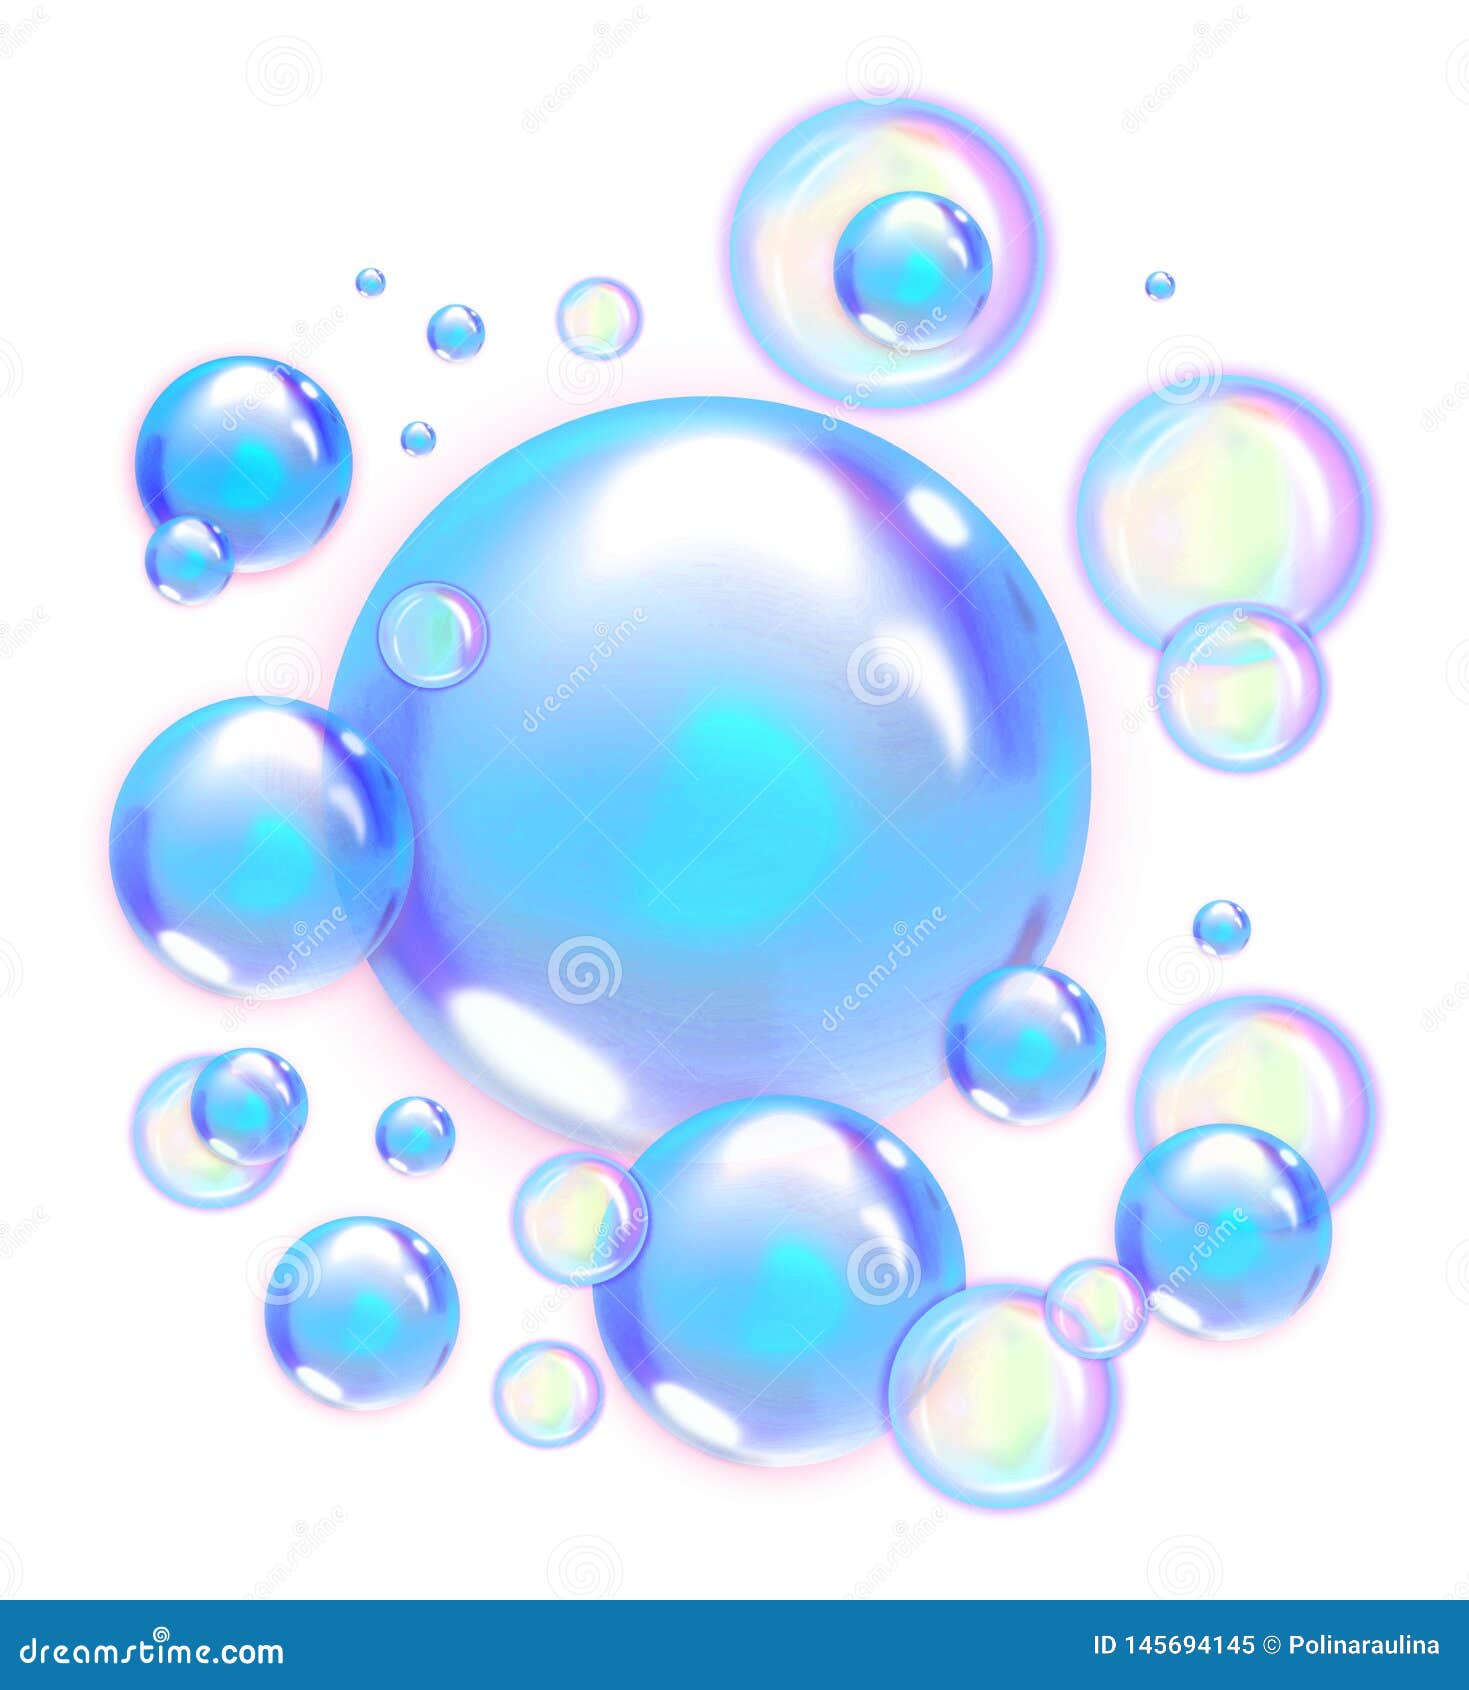 Soap Water Png Stock Illustrations – 756 Soap Water Png Stock